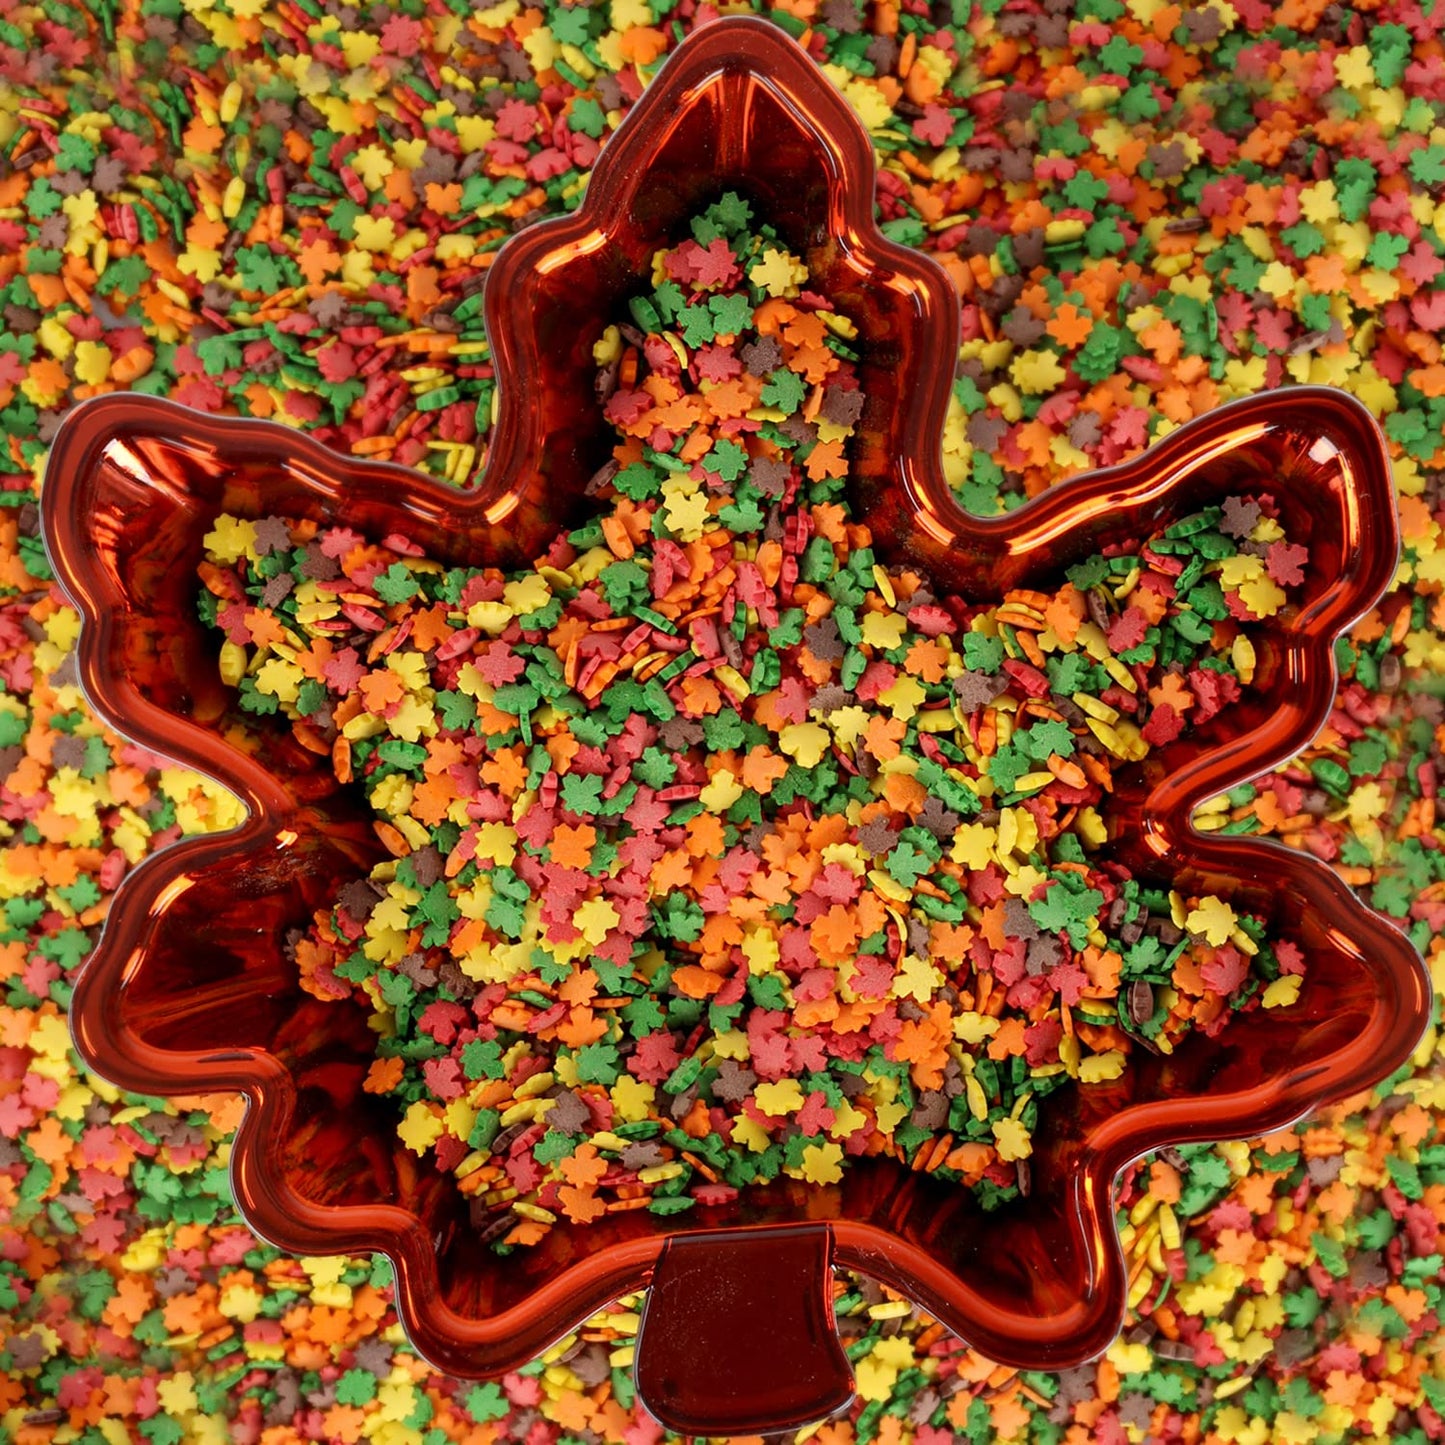 Autumn Leaf Confetti Sprinkles - 10 oz Bulk - Thanksgiving Jimmies - Fall Leaves for Cake Cupcake Cookie Decorating - Harvest Decorating - Dessert Topping